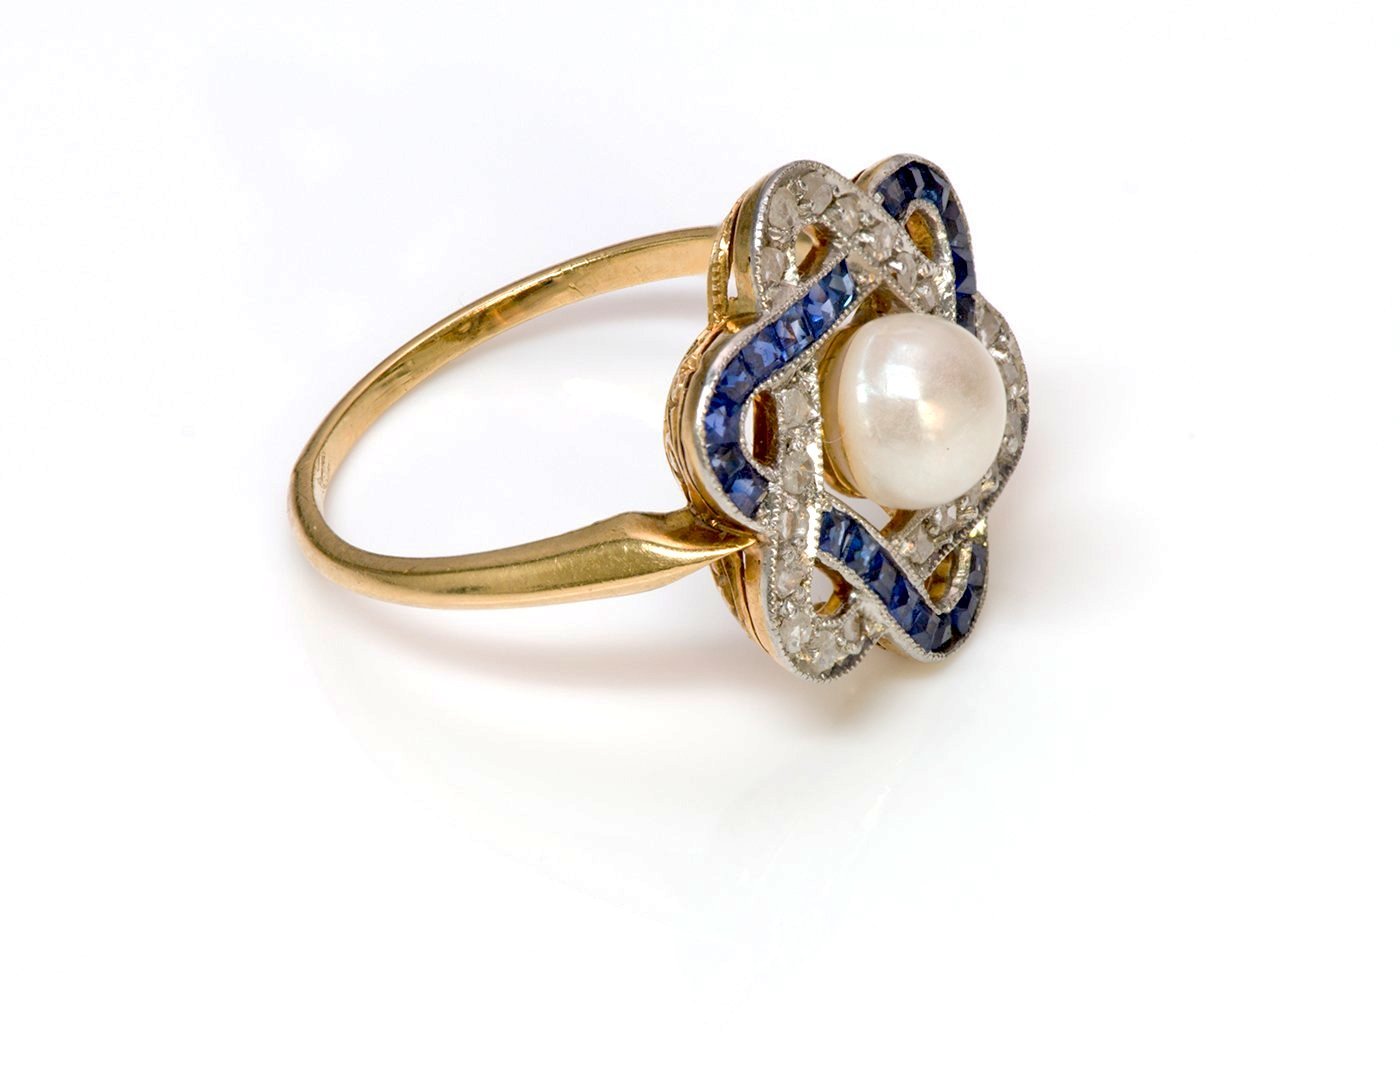 Antique Edwardian Sapphire Diamond Pearl 18K Gold Ring - DSF Antique Jewelry